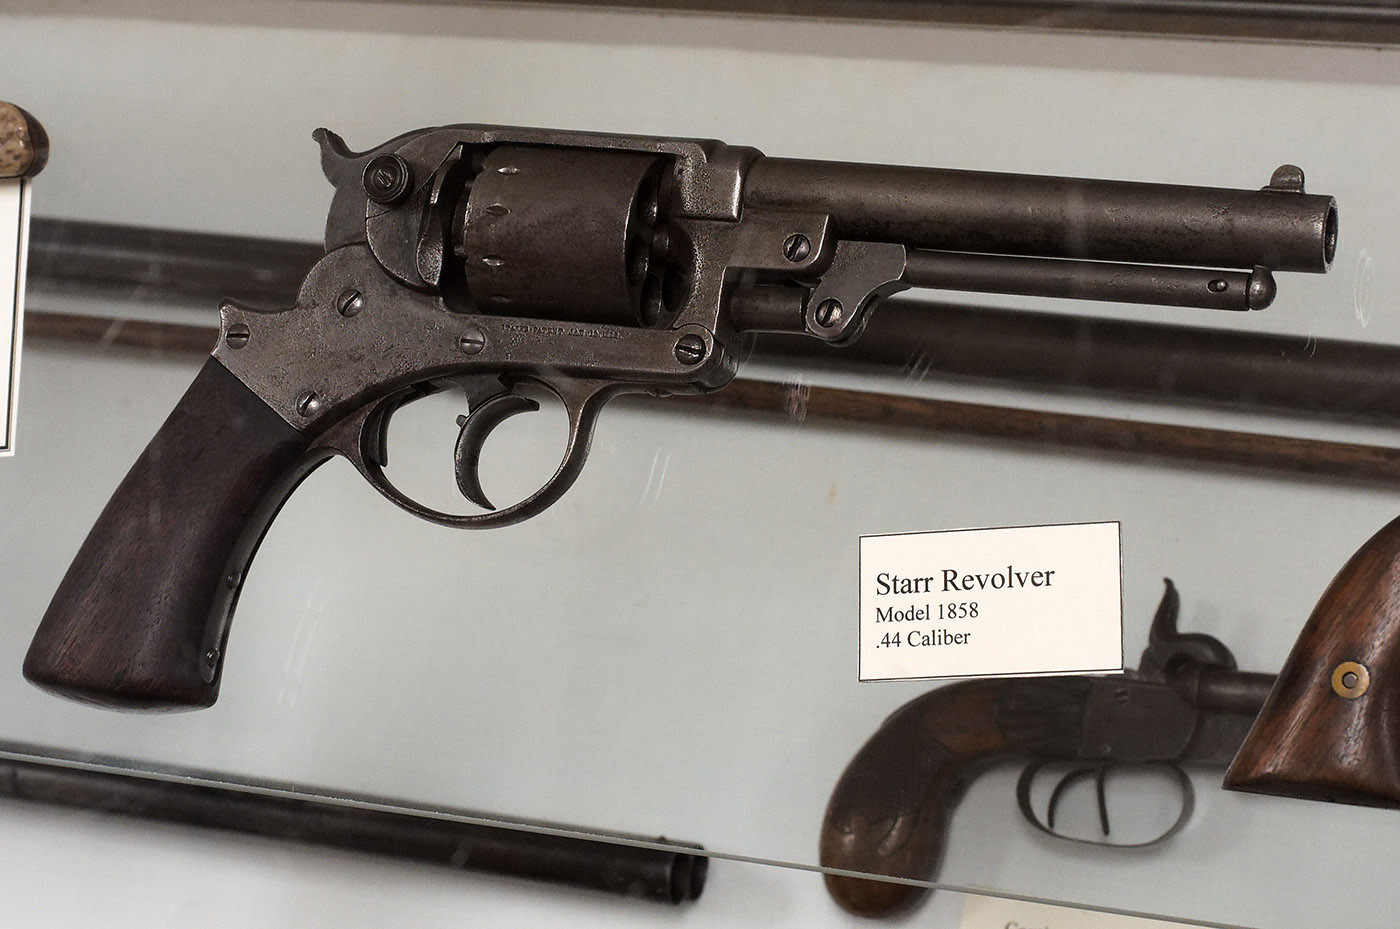 One of the Civil War era weapons.